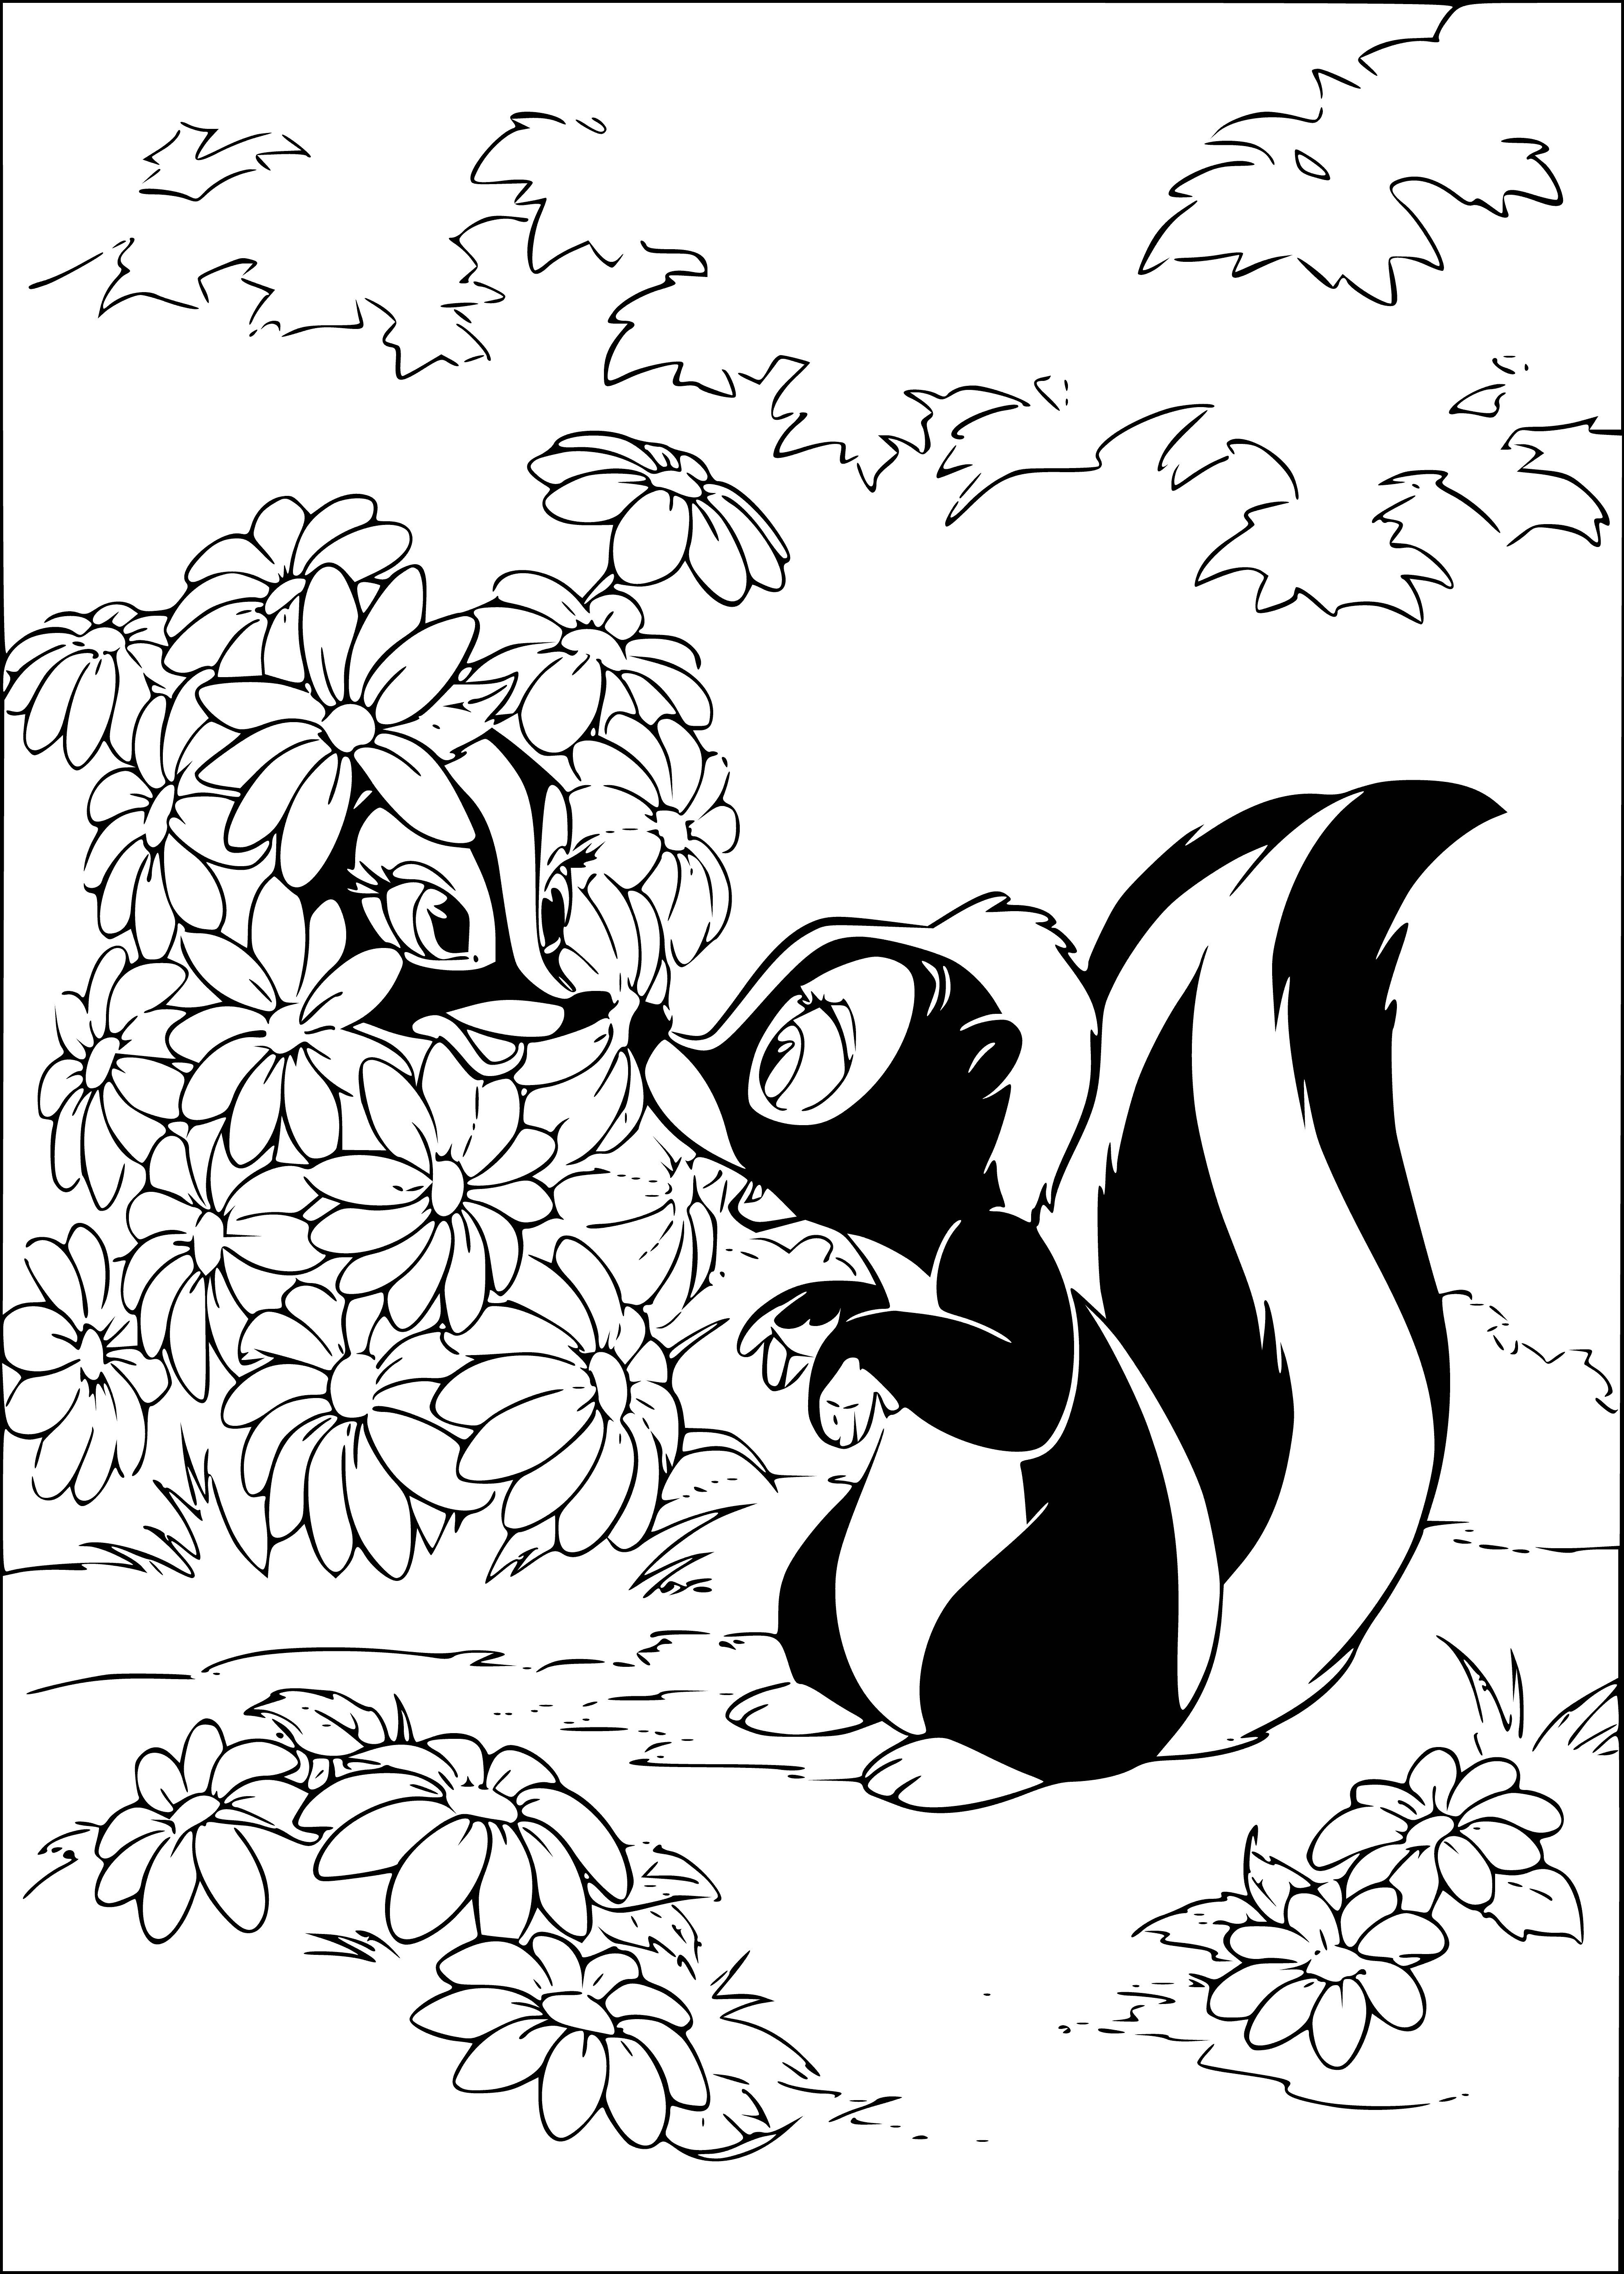 coloring page: Two skunks, black & white, standing side-by-side with long tails! #ColoringPage